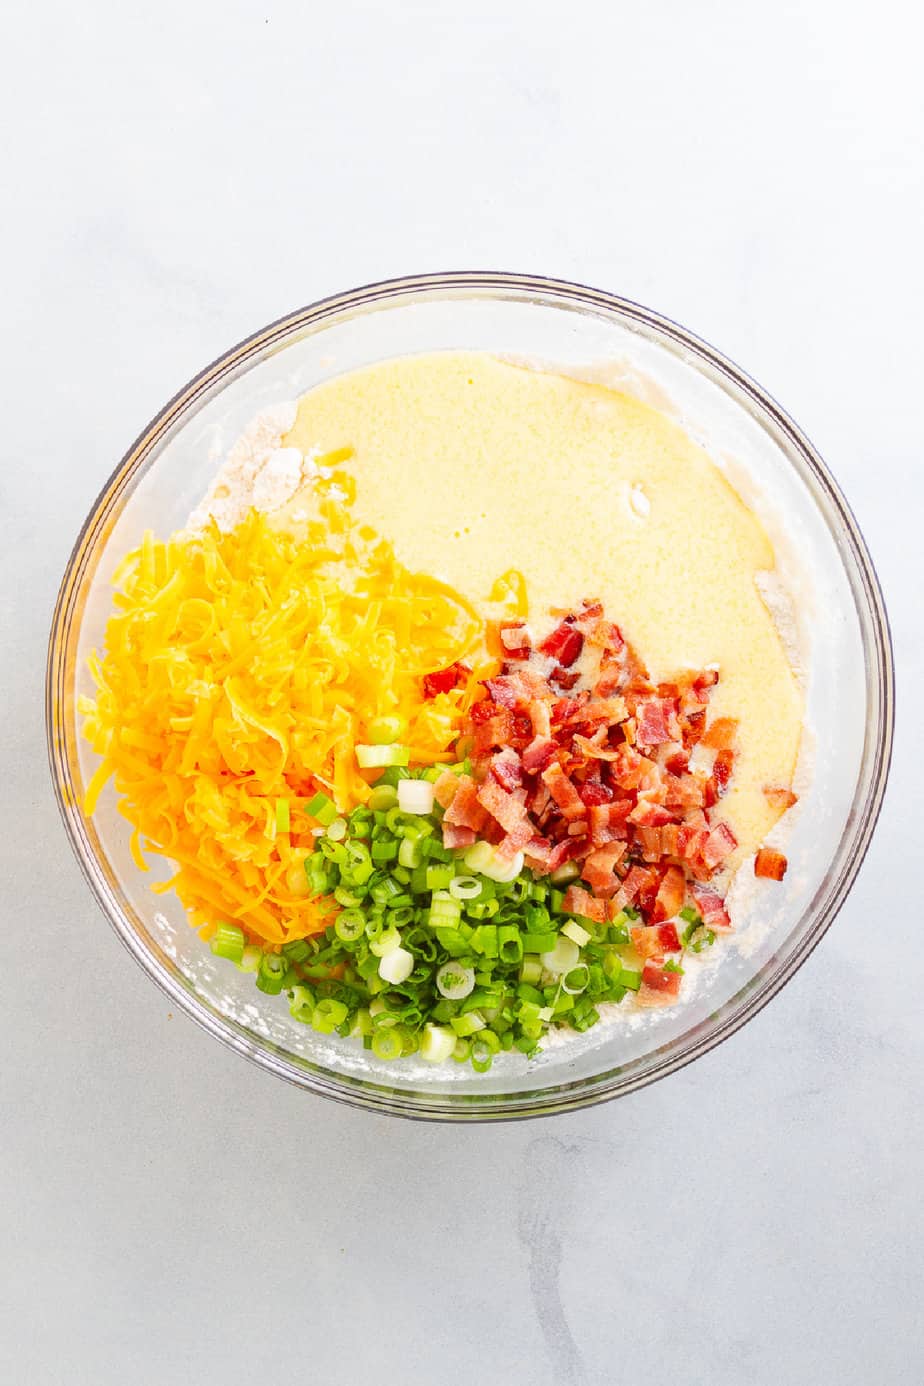 Shredded cheddar cheese, diced green onions and diced bacon on top of a yellow dough in a large mixing bowl from above on a counter.